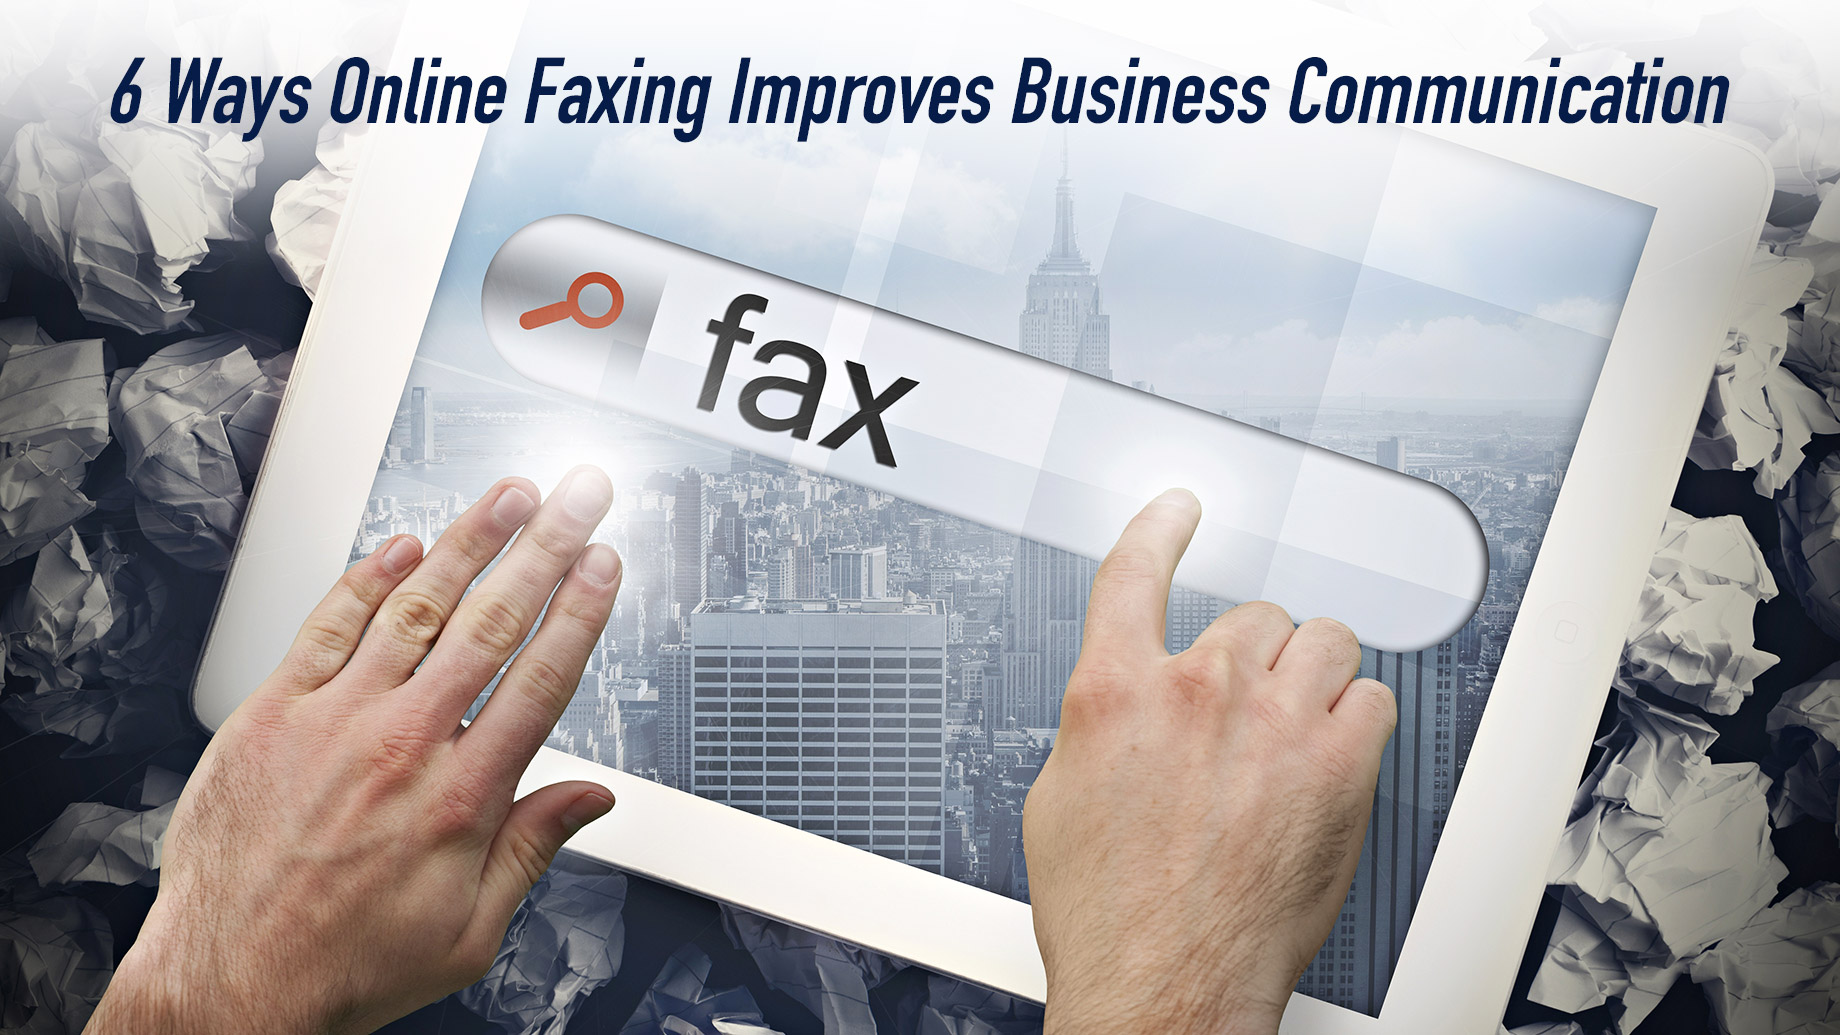 6 Ways Online Faxing Improves Business Communication